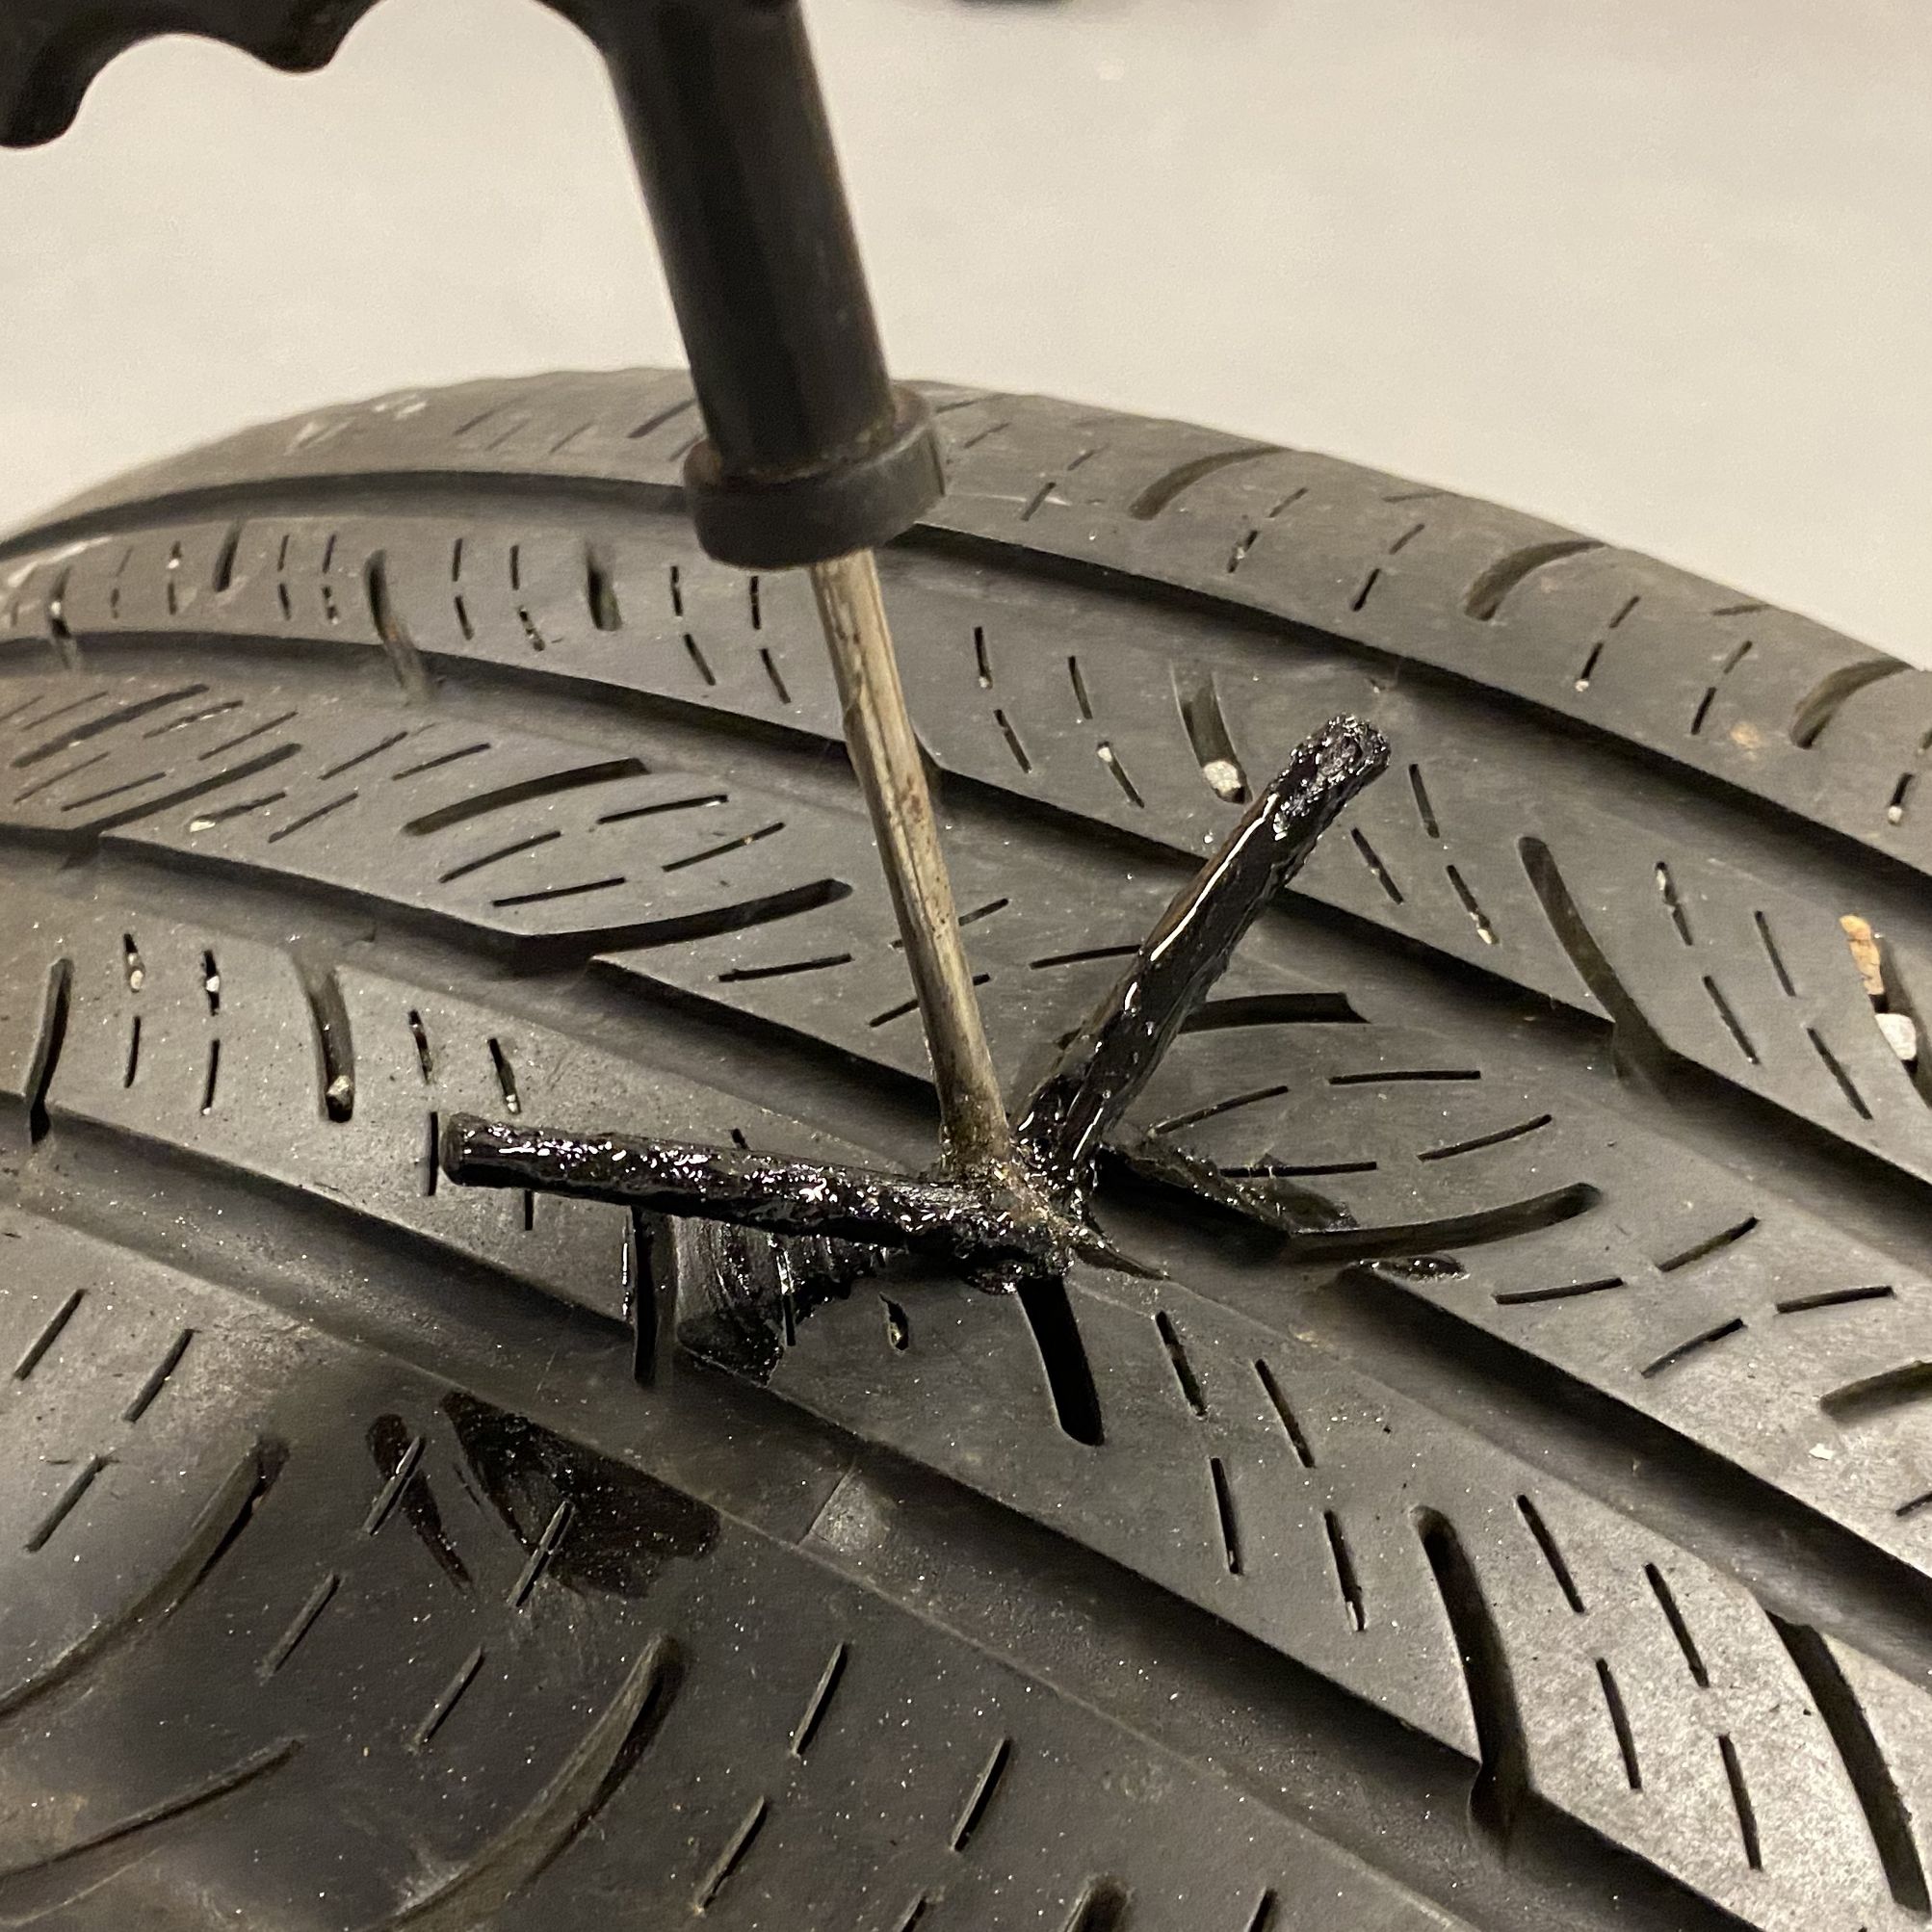 Repairing a Flat Tire is Easier (and Cheaper) Than You Think